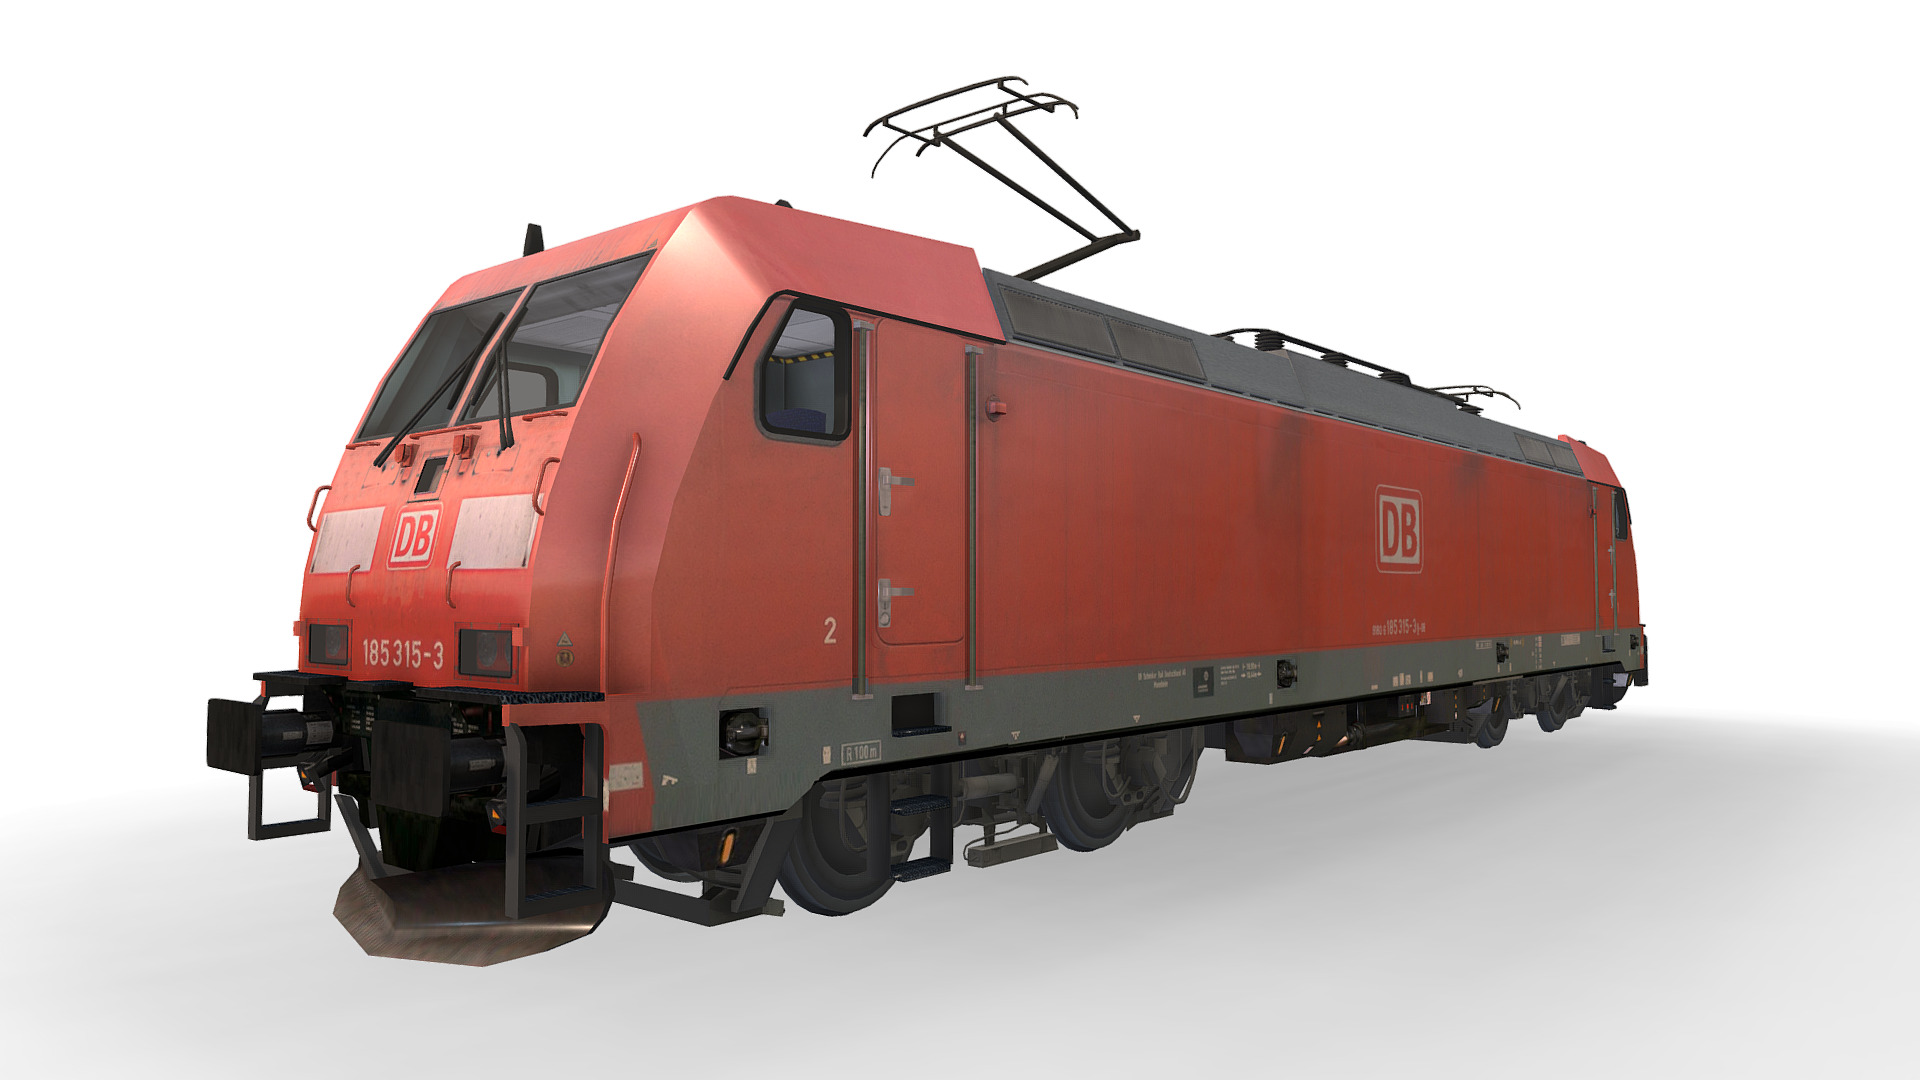 3D model Locomotive Class 185 315-3 – DB Cargo - This is a 3D model of the Locomotive Class 185 315-3 - DB Cargo. The 3D model is about a red train car.